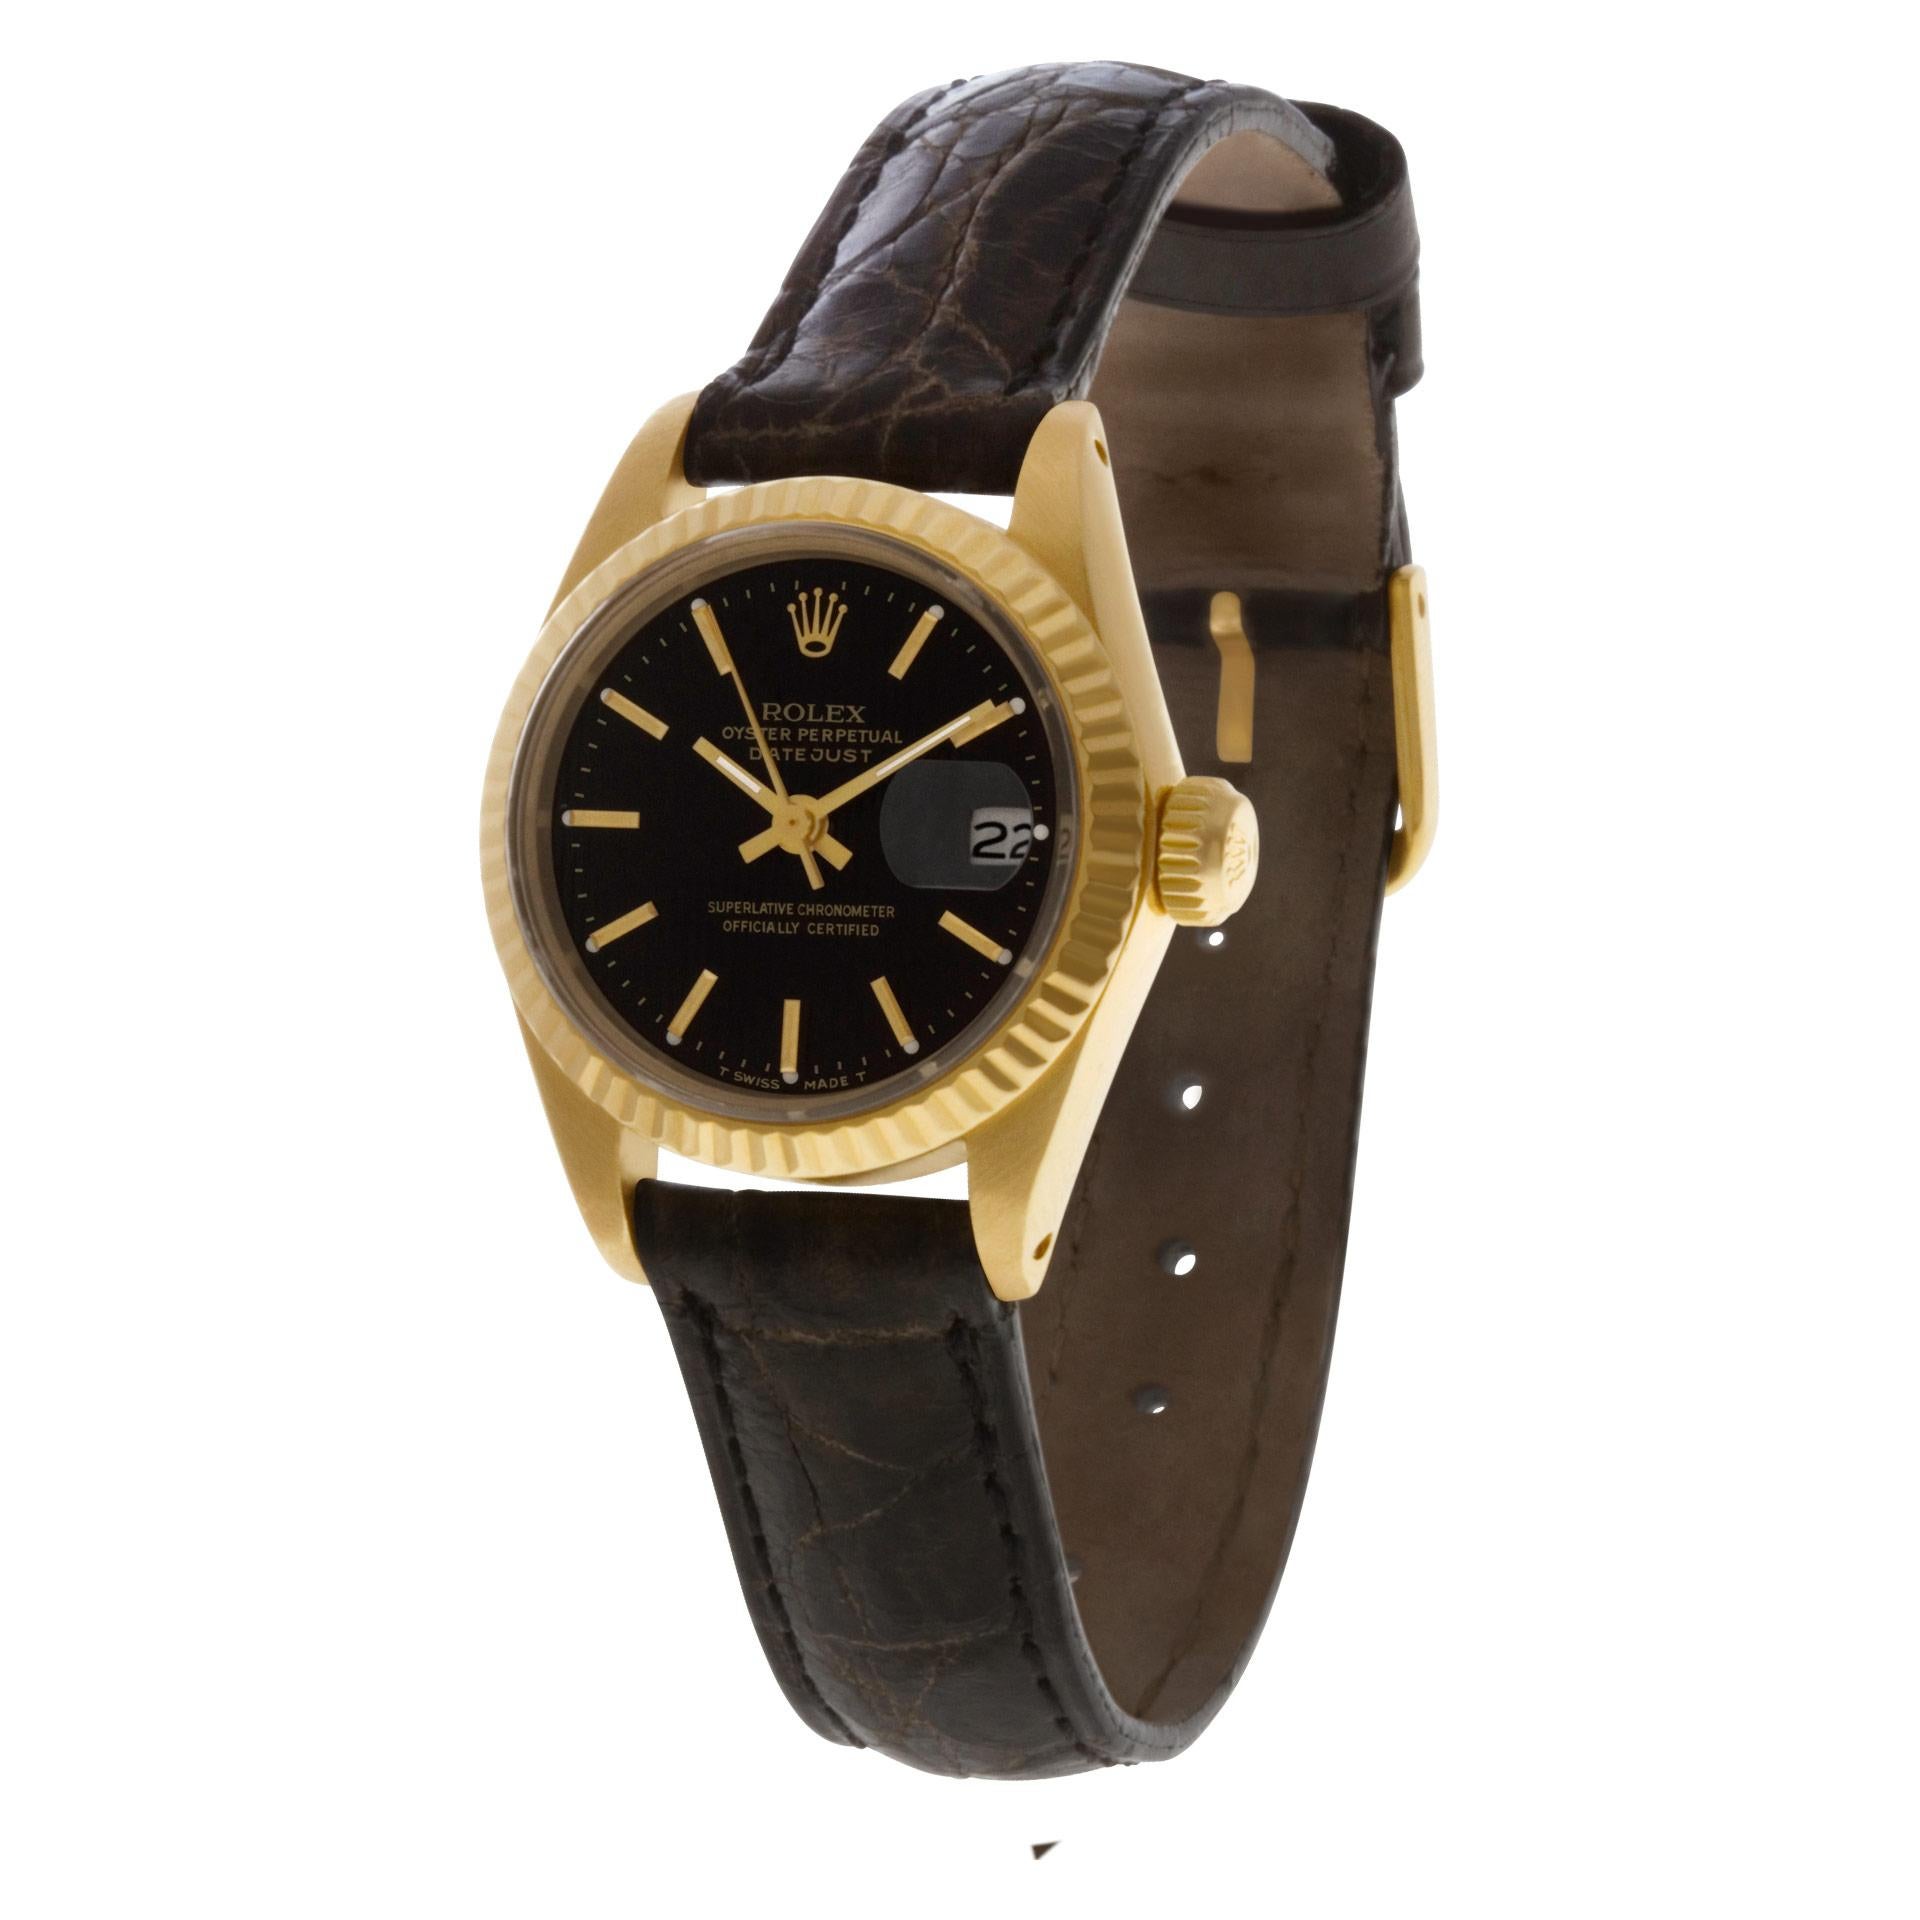 Rolex Datejust in 18k yellow gold with a black tapestry stick dial on a black crocodile strap. Auto with sweep seconds and date. Ref 6917. Circa 1980. Fine Pre-owned Rolex Watch. Certified preowned Rolex Datejust 6917 watch is made out of yellow